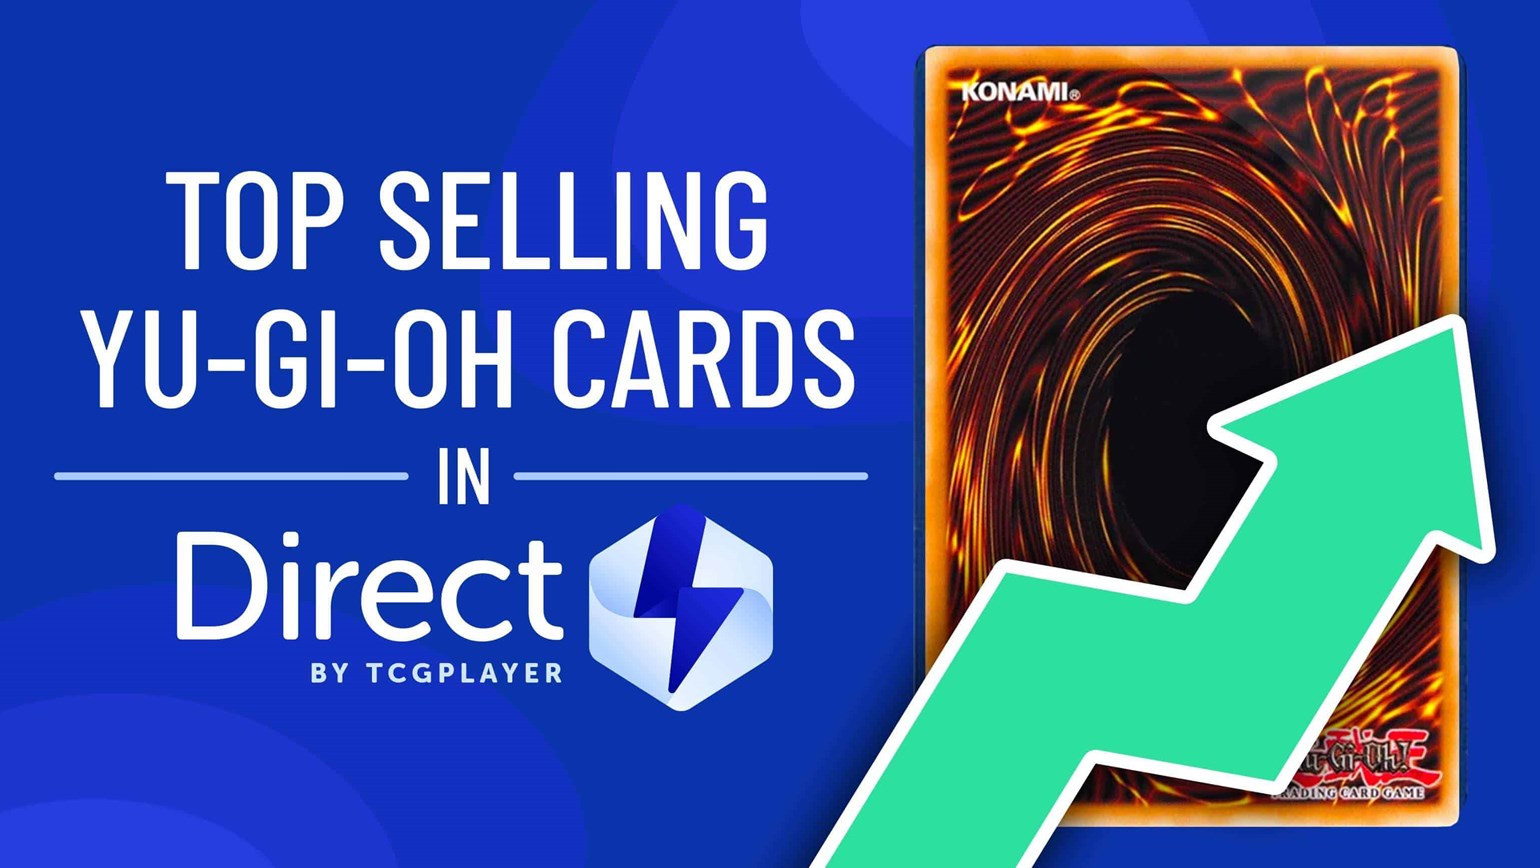 June Top Selling Yu-Gi-Oh! Cards Under $25 in Direct by TCGplayer